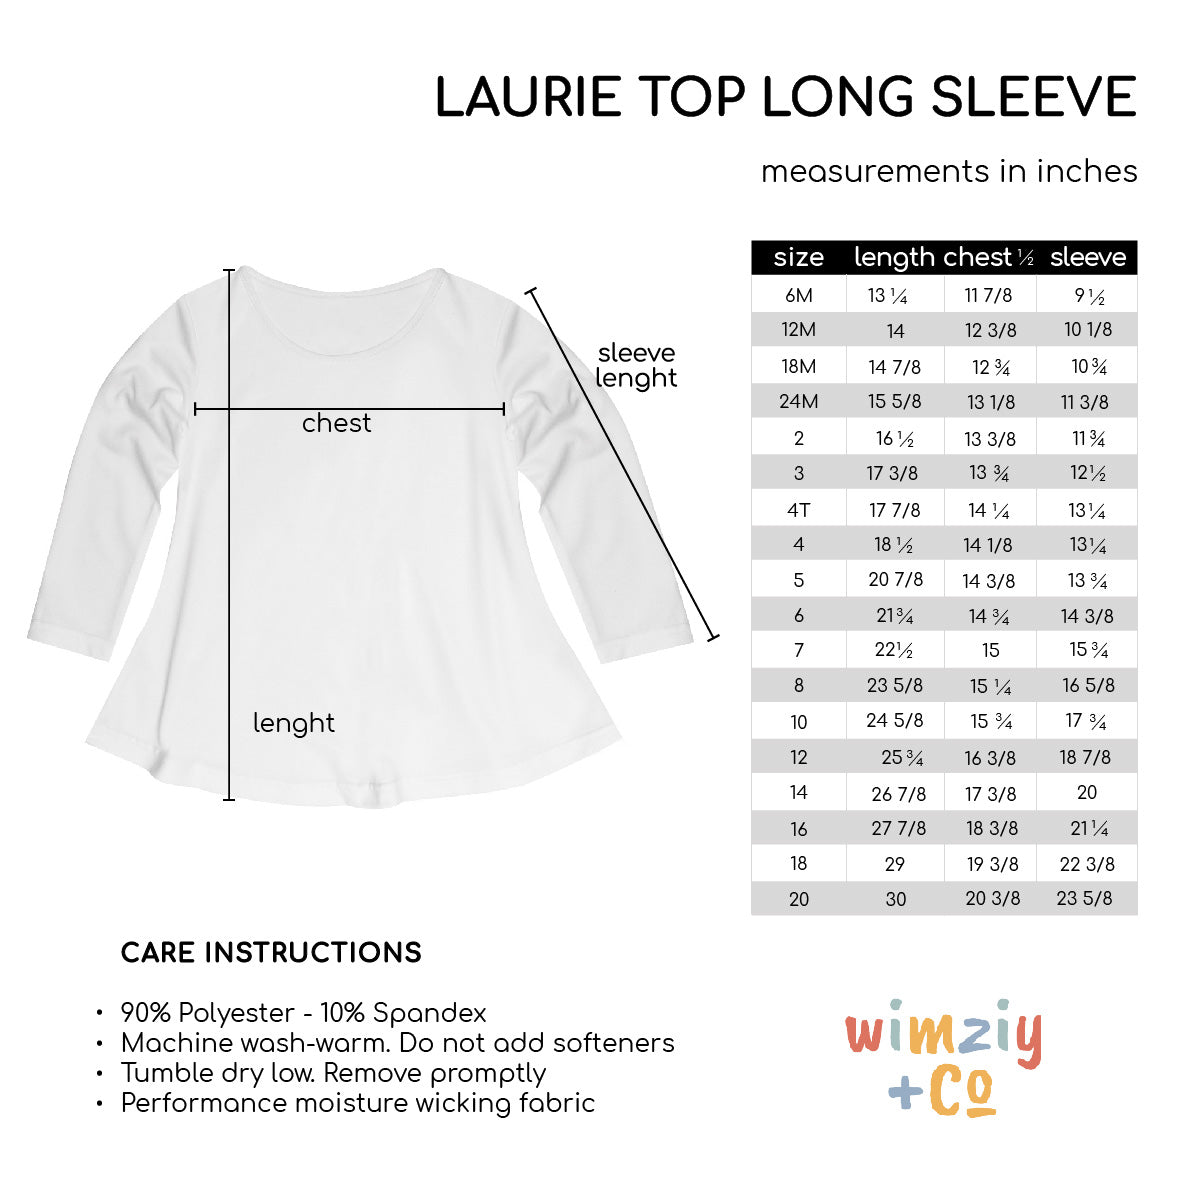 Back To School Elements White Long Sleeve Laurie Top - Wimziy&Co.